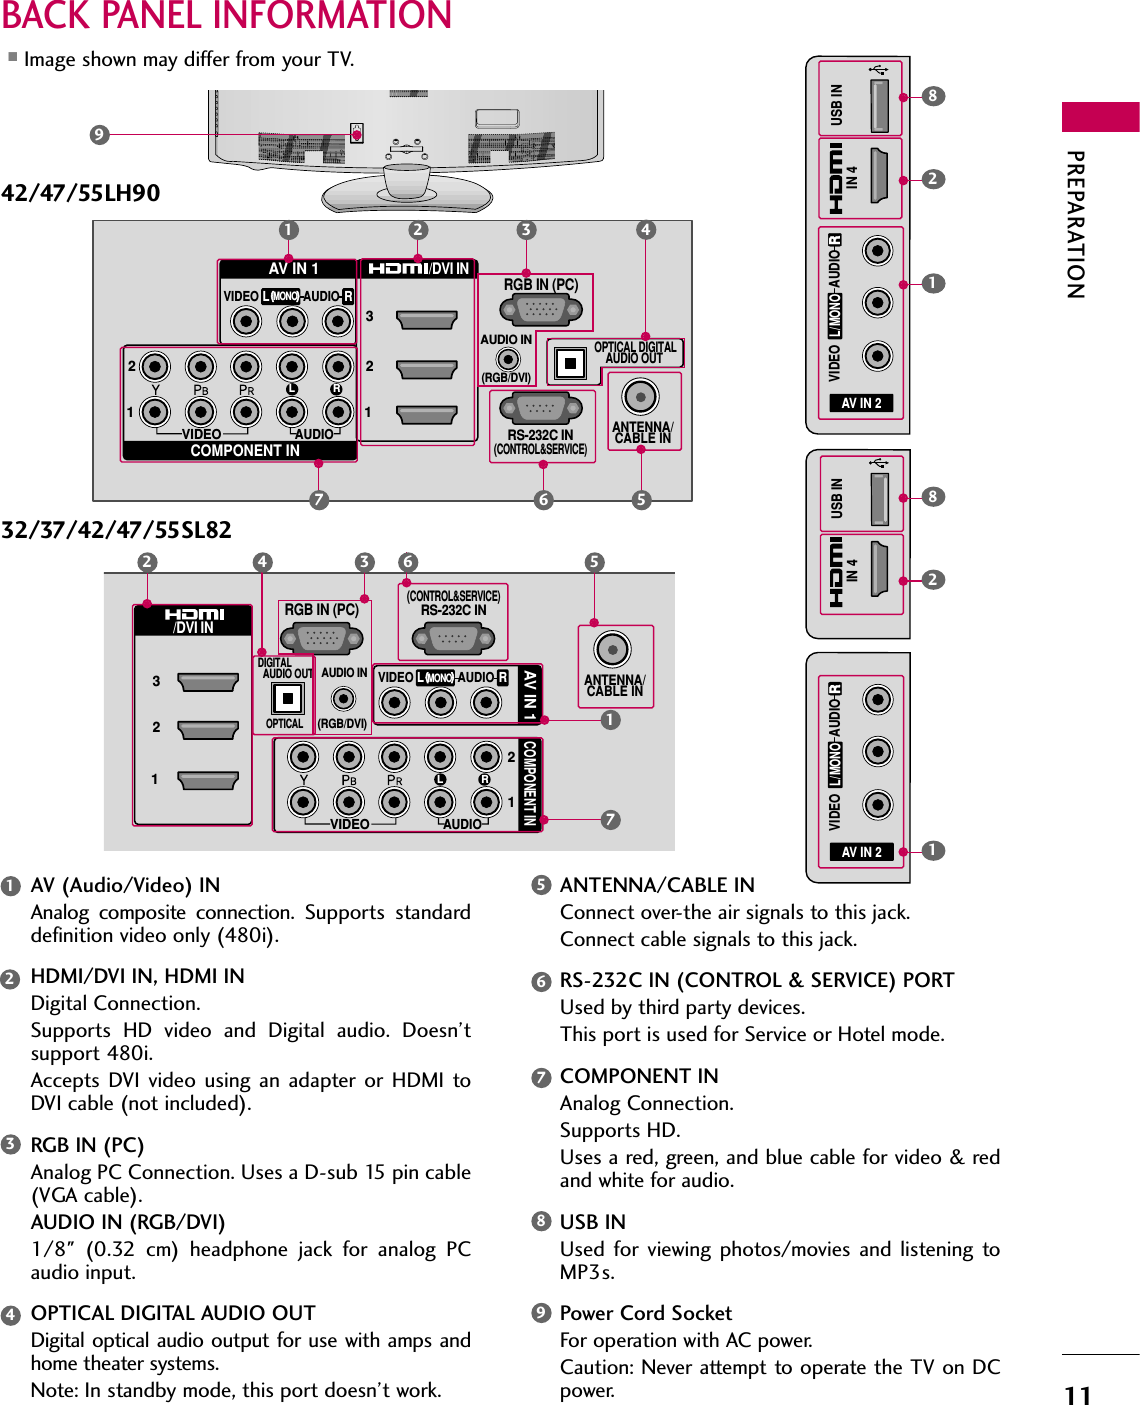 PREPARATION11BACK PANEL INFORMATION■Image shown may differ from your TV.VIDEOAUDIOL RRS-232C IN(CONTROL&amp;SERVICE)AUDIO IN(RGB/DVI)OPTICAL DIGITALAUDIO OUT ANTENNA/CABLE INRGB IN (PC)AV IN 1COMPONENT IN23121MONO(                        )AUDIOVIDEO/DVI IN(            )(            )LRR1 26 579(            )(            )(            )AV IN 2L/MONORAUDIOVIDEOUSB ININ 41824AV (Audio/Video) INAnalog  composite  connection. Supports  standarddefinition video only (480i).HDMI/DVI IN, HDMI INDigital Connection. Supports  HD  video  and  Digital  audio.  Doesn’tsupport 480i. Accepts  DVI  video  using  an  adapter  or  HDMI  toDVI cable (not included).RGB IN (PC)Analog PC Connection. Uses a D-sub 15 pin cable(VGA cable).AUDIO IN (RGB/DVI)1/8&quot;  (0.32  cm)  headphone  jack  for  analog  PCaudio input.OPTICAL DIGITAL AUDIO OUTDigital  optical audio  output for  use with  amps andhome theater systems. Note: In standby mode, this port doesn’t work.ANTENNA/CABLE INConnect over-the air signals to this jack.Connect cable signals to this jack.RS-232C IN (CONTROL &amp; SERVICE) PORTUsed by third party devices.This port is used for Service or Hotel mode.COMPONENT INAnalog Connection. Supports HD. Uses a red, green, and blue cable for video &amp; redand white for audio.USB INUsed  for  viewing photos/movies  and  listening toMP3s.Power Cord SocketFor operation with AC power. Caution: Never attempt to operate the TV on DCpower.123489765(            )USB ININ 4R(            )AV IN 2L/MONORAUDIOVIDEO3VIDEOAUDIOL R(CONTROL&amp;SERVICE)RS-232C INAUDIO IN(RGB/DVI)DIGITAL  AUDIO OUT OPTICALANTENNA/CABLE INRGB IN (PC)COMPONENT IN23112MONO(                        )AUDIOVIDEO/DVI INLRRAV IN 12 4 3 6 51718242/47/55LH9032/37/42/47/55SL82